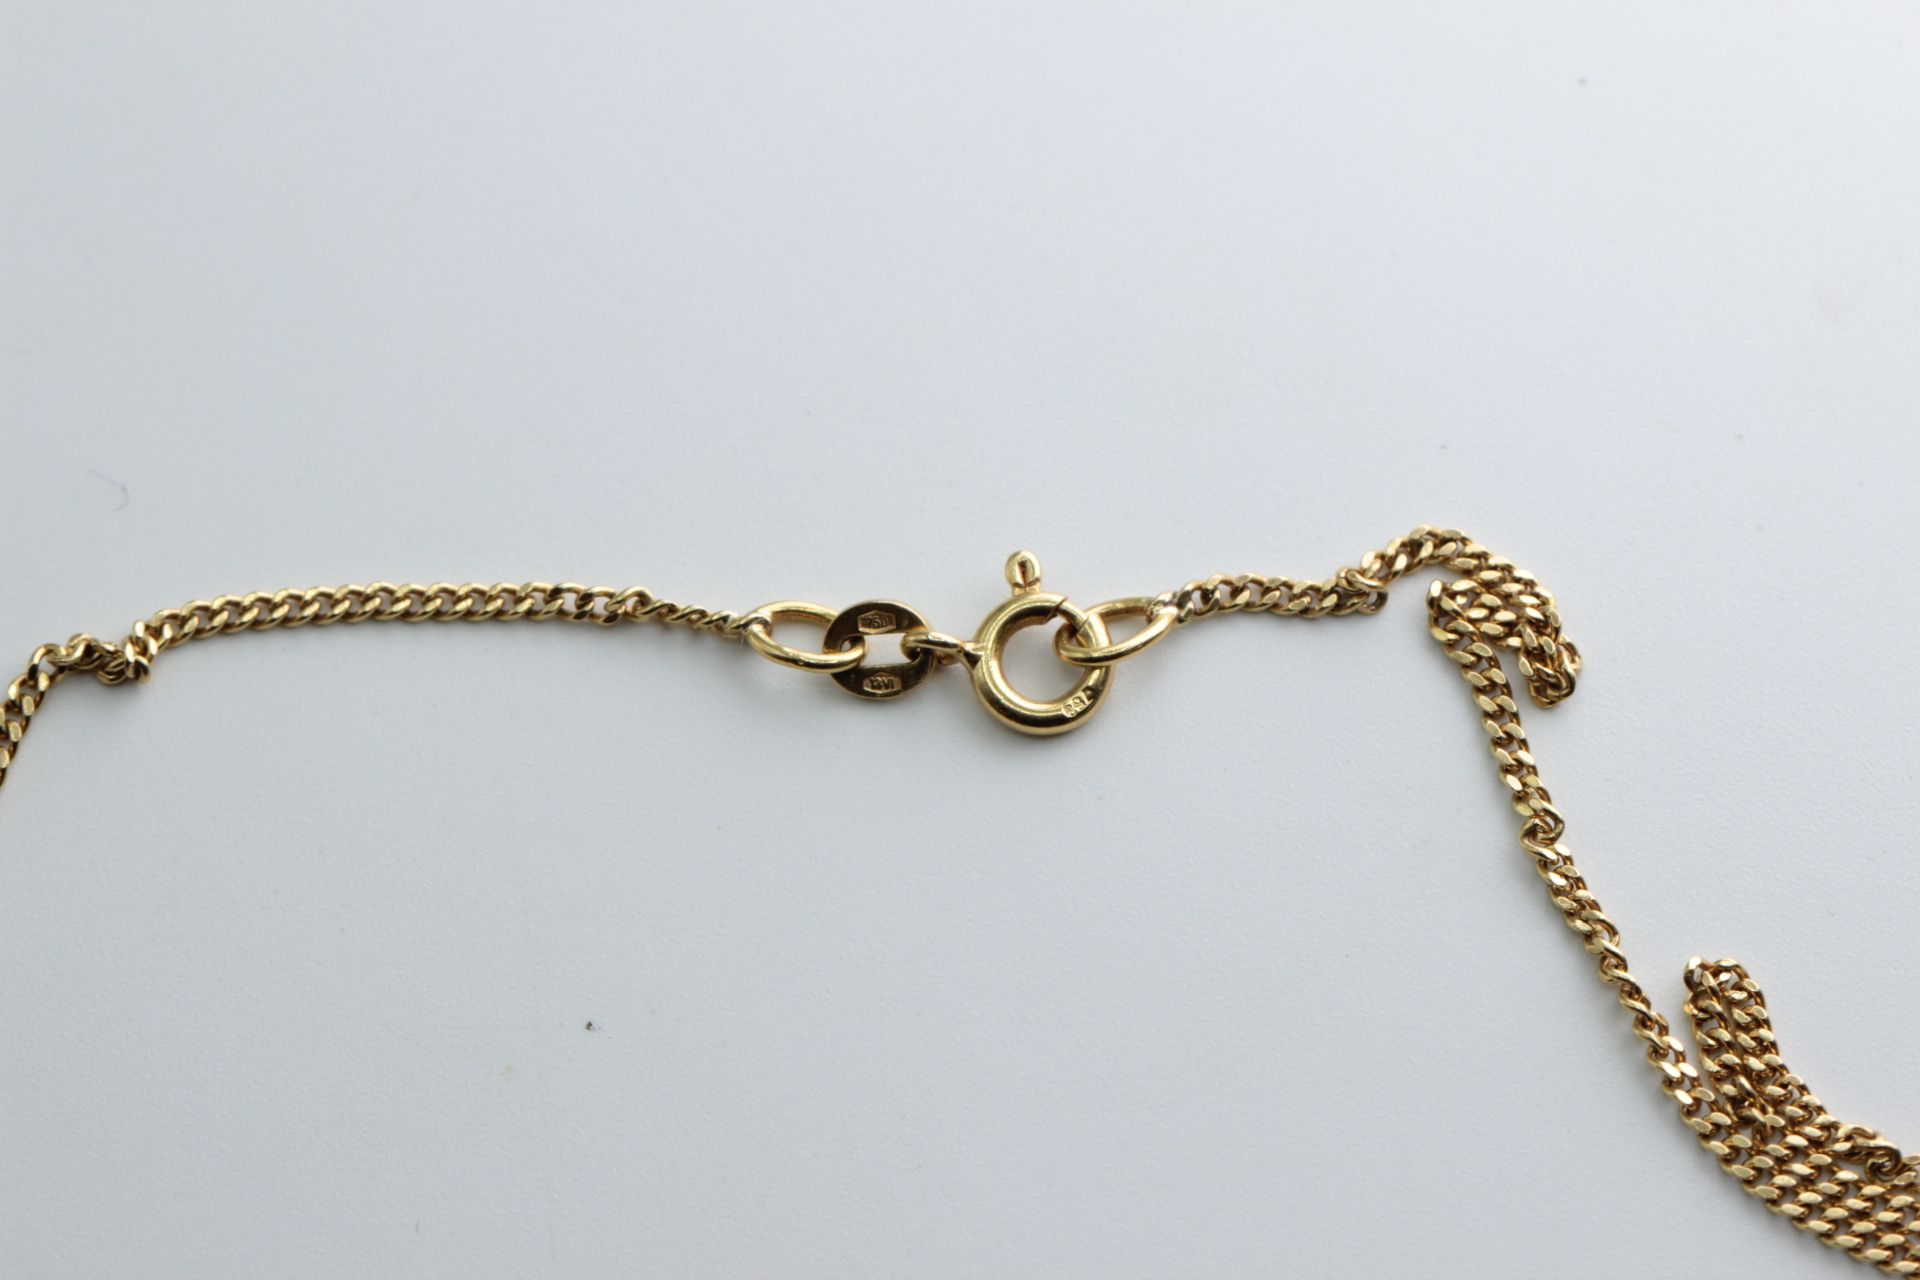 Necklace / Chain / Flat Curb Chain 62cm 24.4 inches - Image 4 of 5